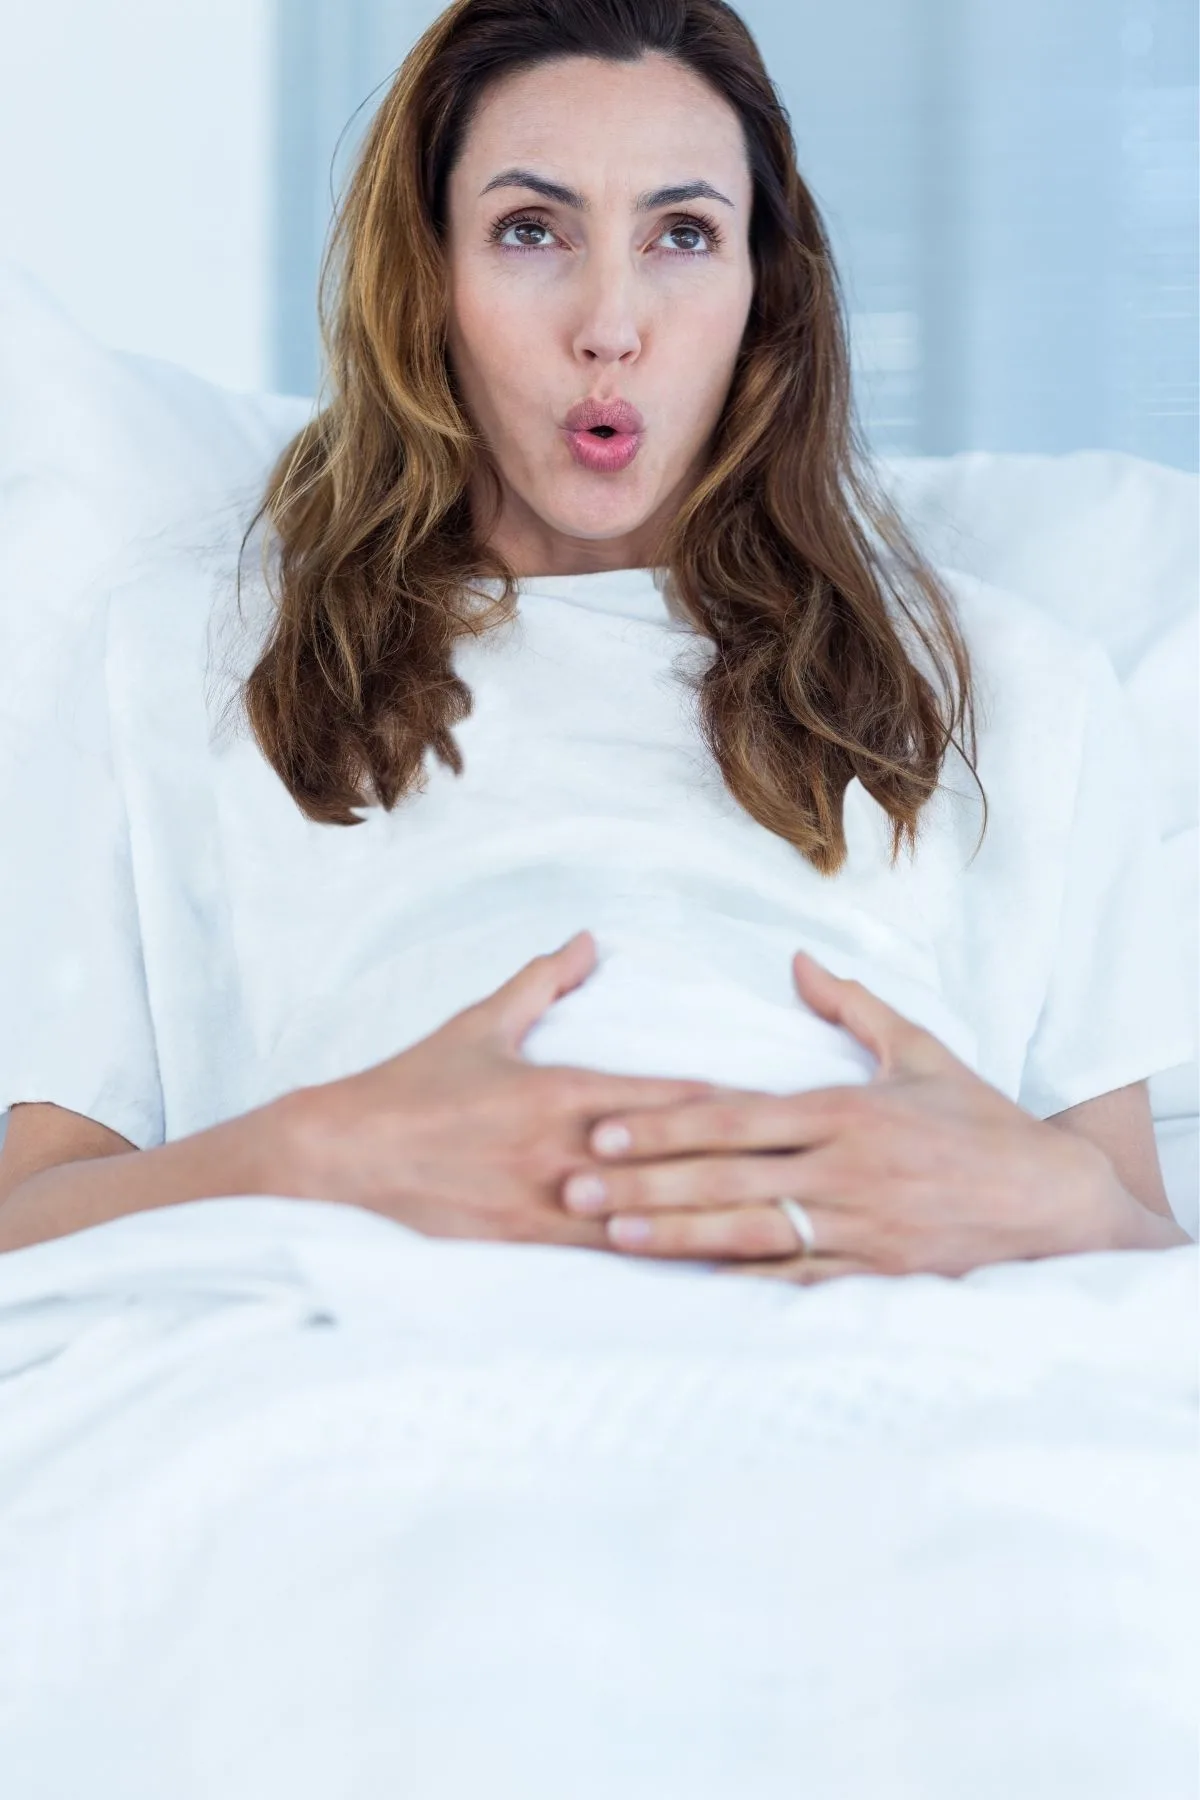 Woman in hospital bed uses rhythmical breathing to ease painful contractions during labor